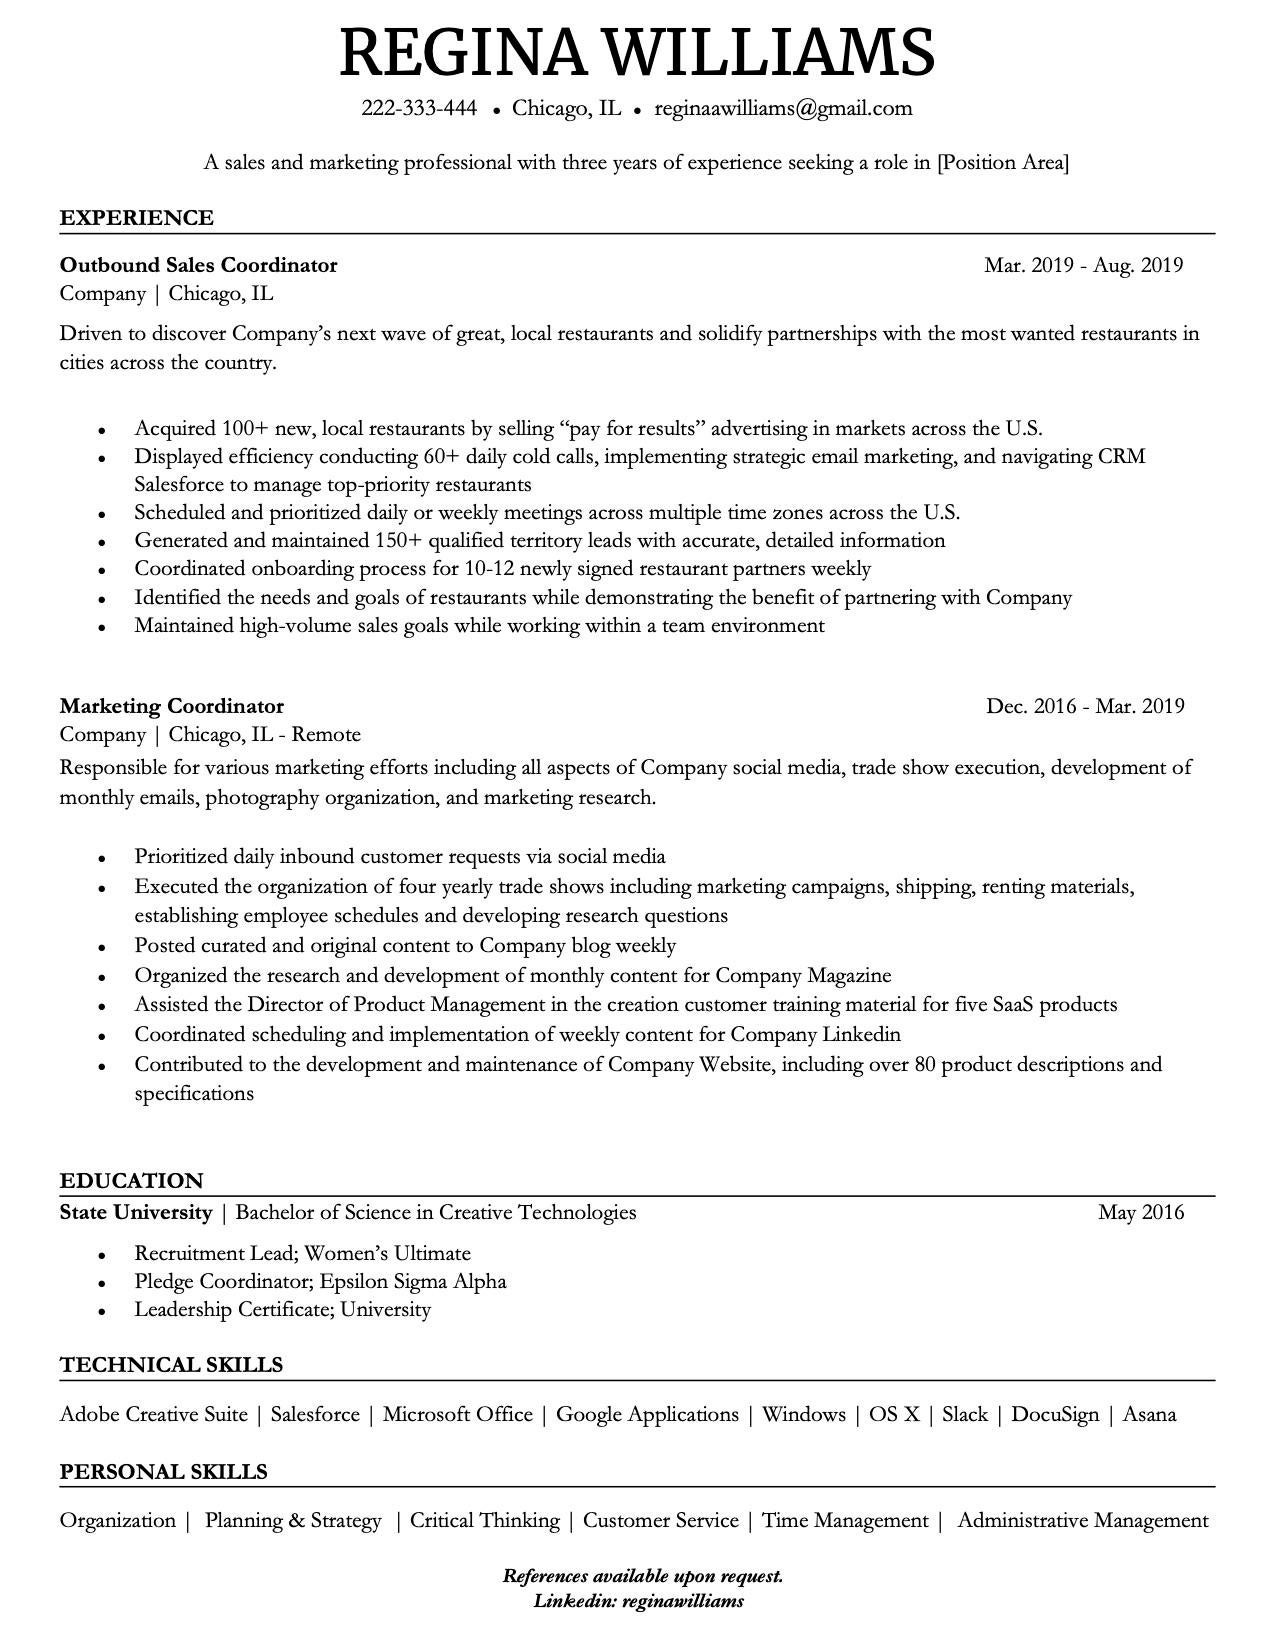 Cover Letter Sample Resume with Gaps In Employment Not Sure if It’s My Resume, Cover Letter, or Employment Gap, but I …